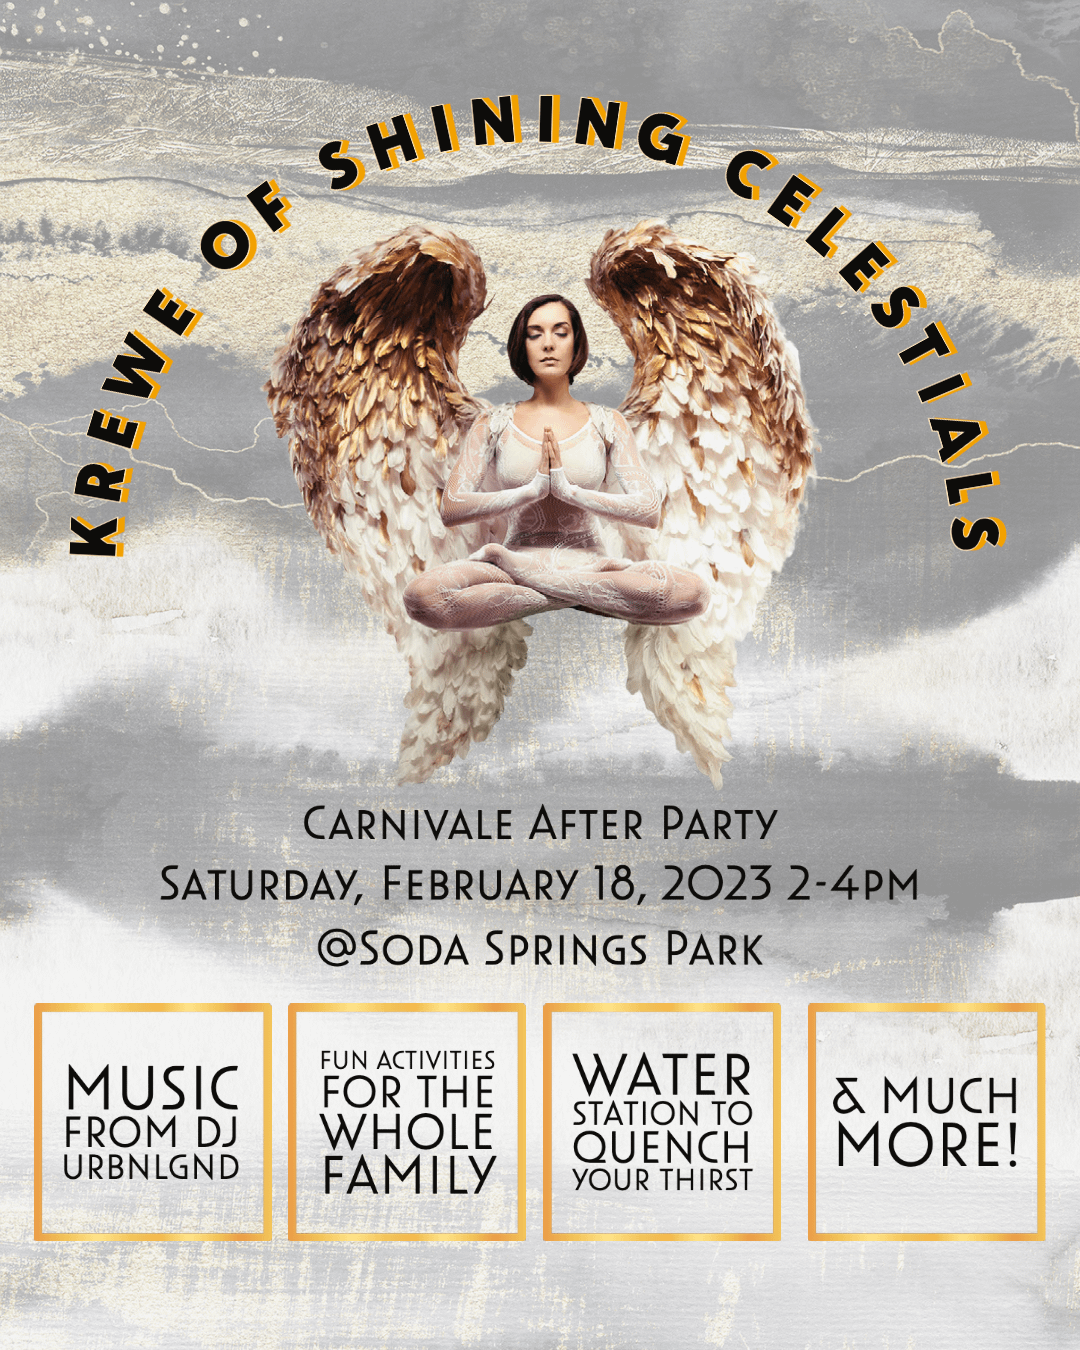 Krewe of Shining Celestials Carnivale After Party